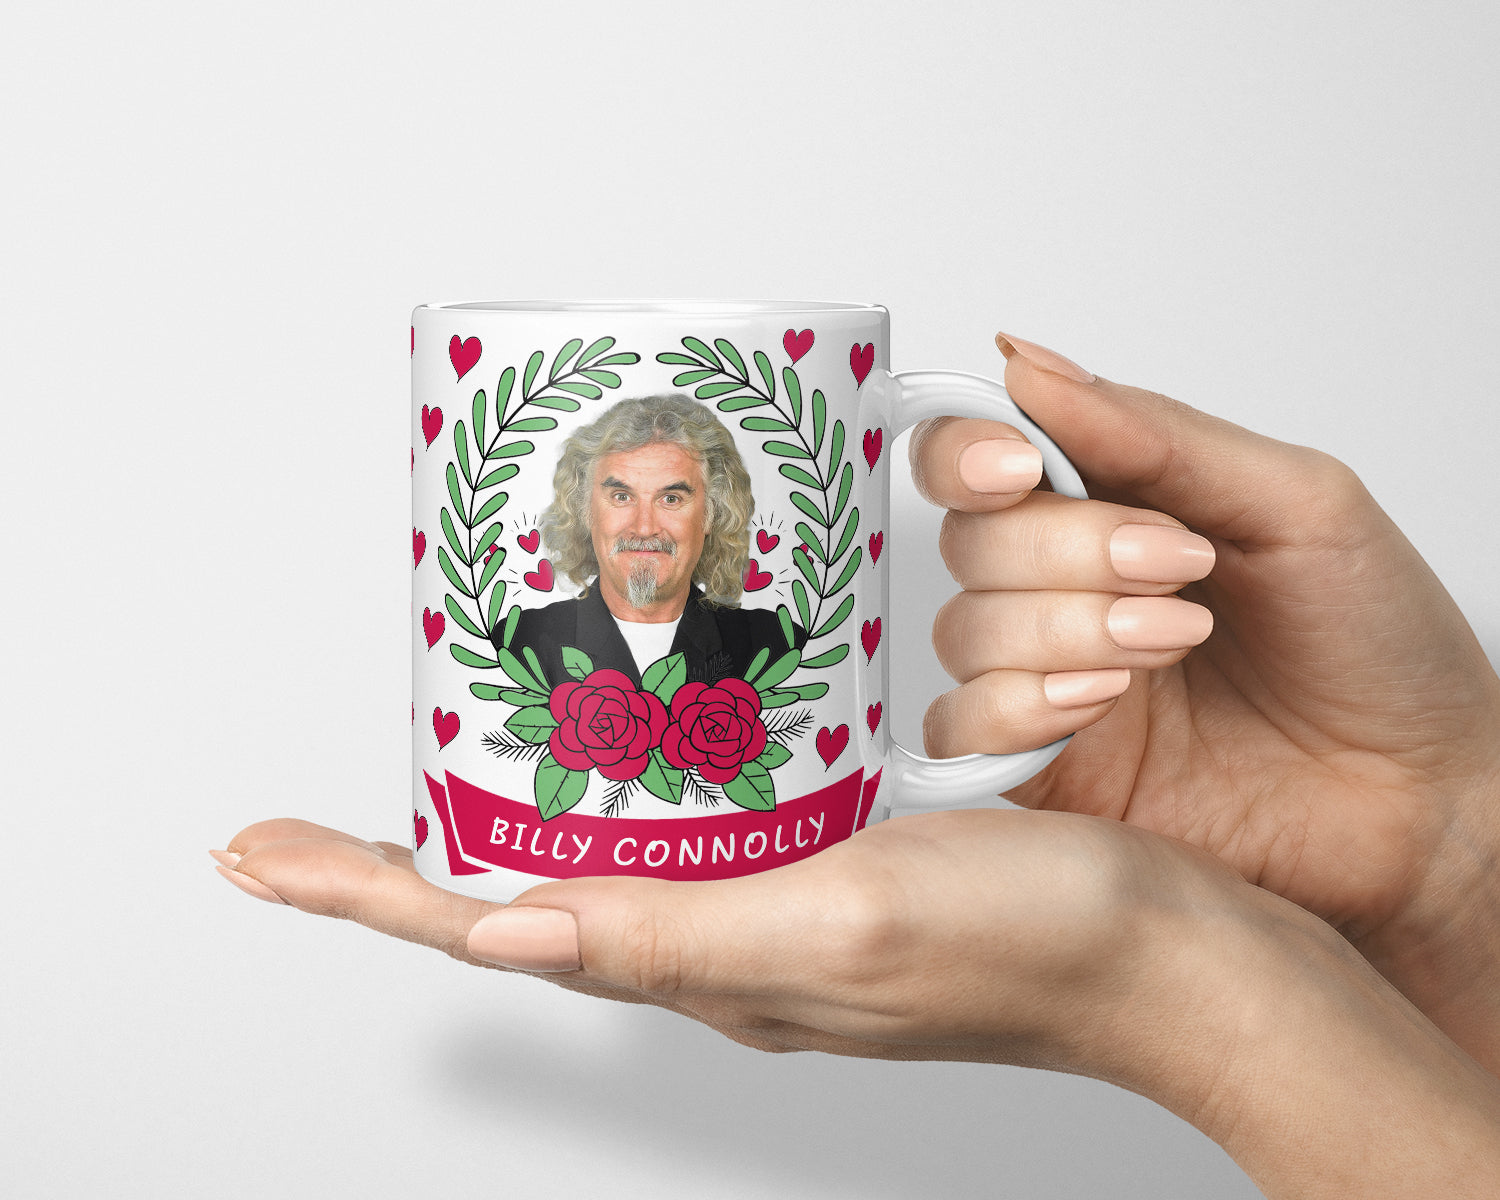 Billy Connolly, Billy Connolly Love Hearts Mug, Cute, Billy Connolly Fan, Billy Connolly Gift, I Love Billy Connolly, Scottish Comedian